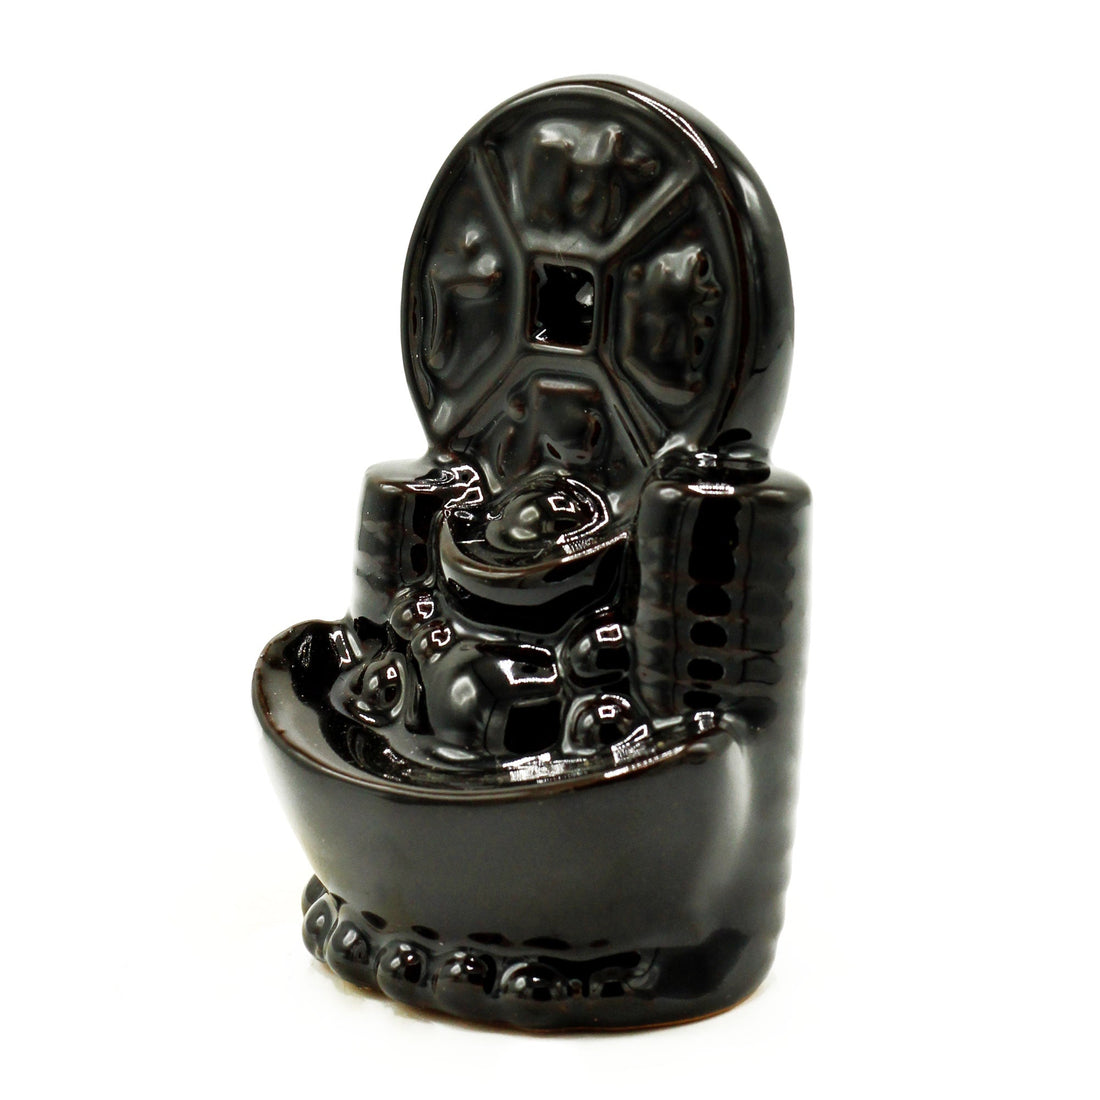 Backflow Incense Burner - Ancient Chinese Coin - best price from Maltashopper.com BACKF-73